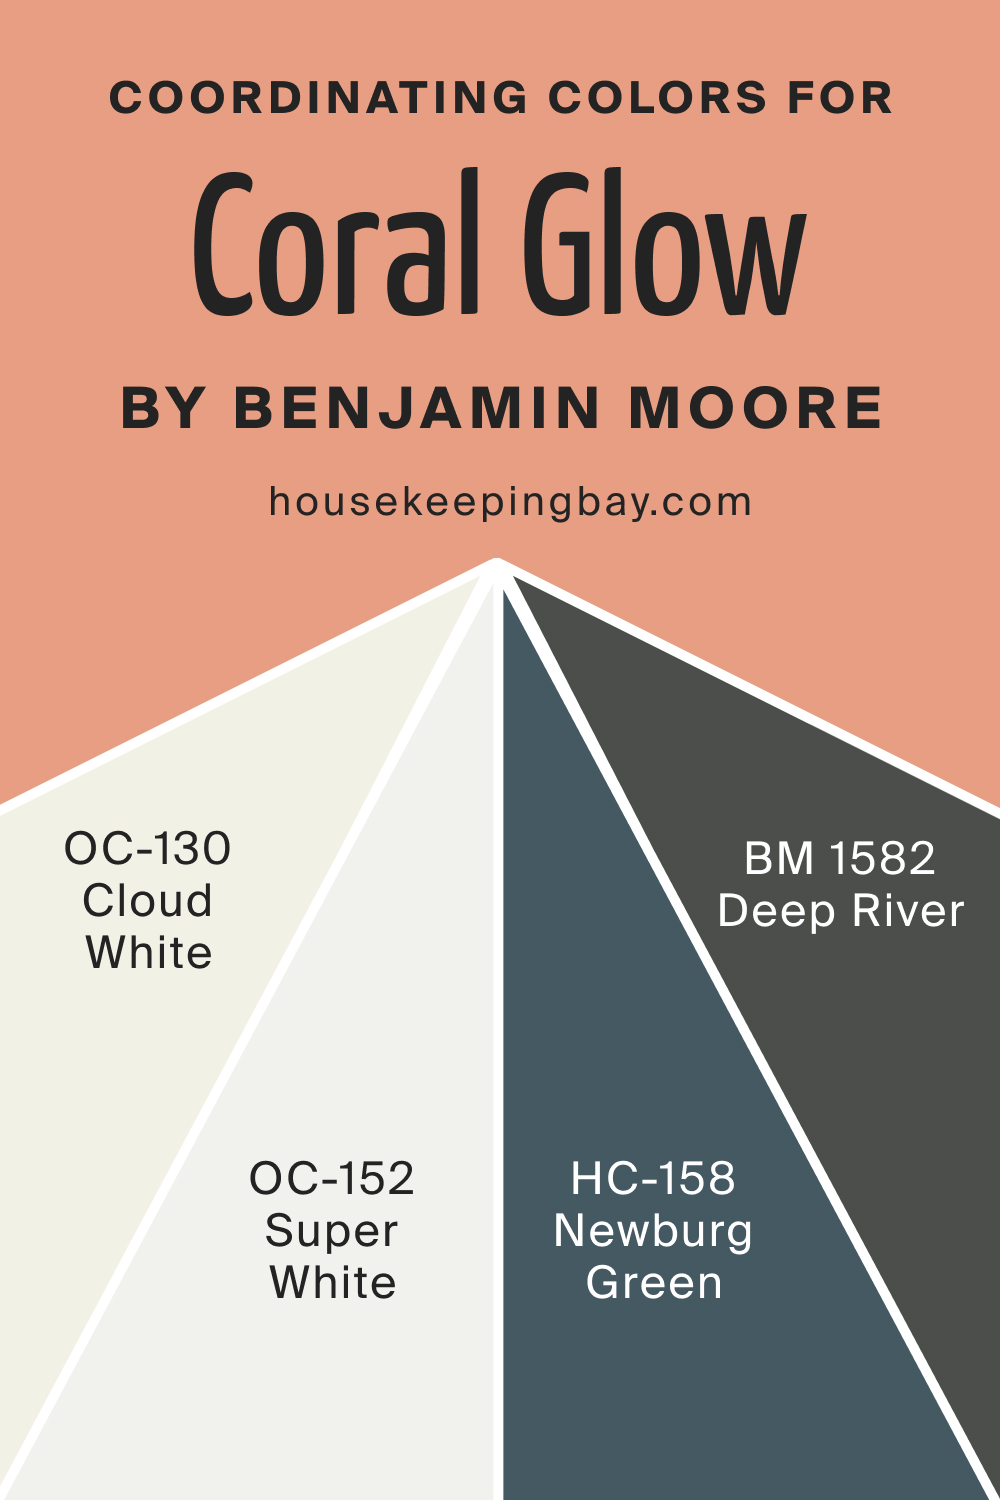 Coordinating Colors for Coral Glow 026 by Benjamin Moore